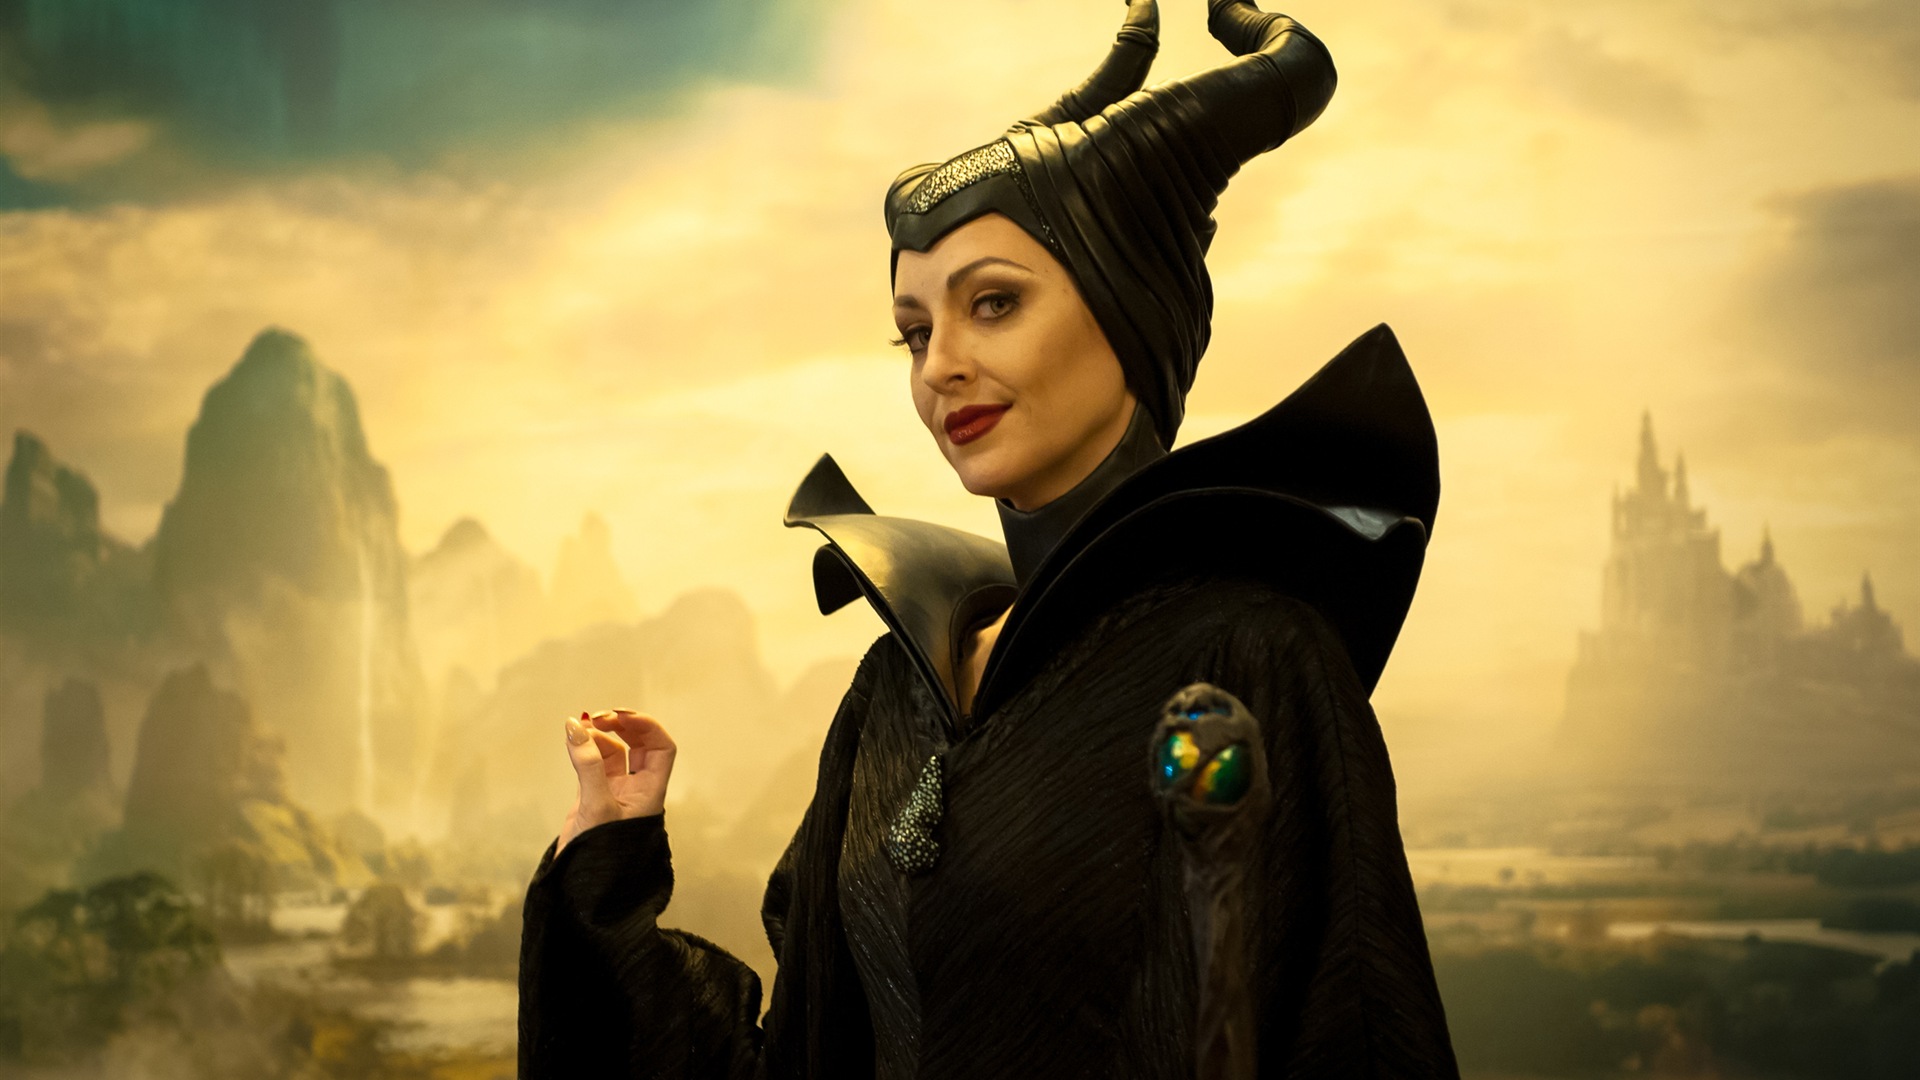 Maleficent 2014 HD movie wallpapers #11 - 1920x1080